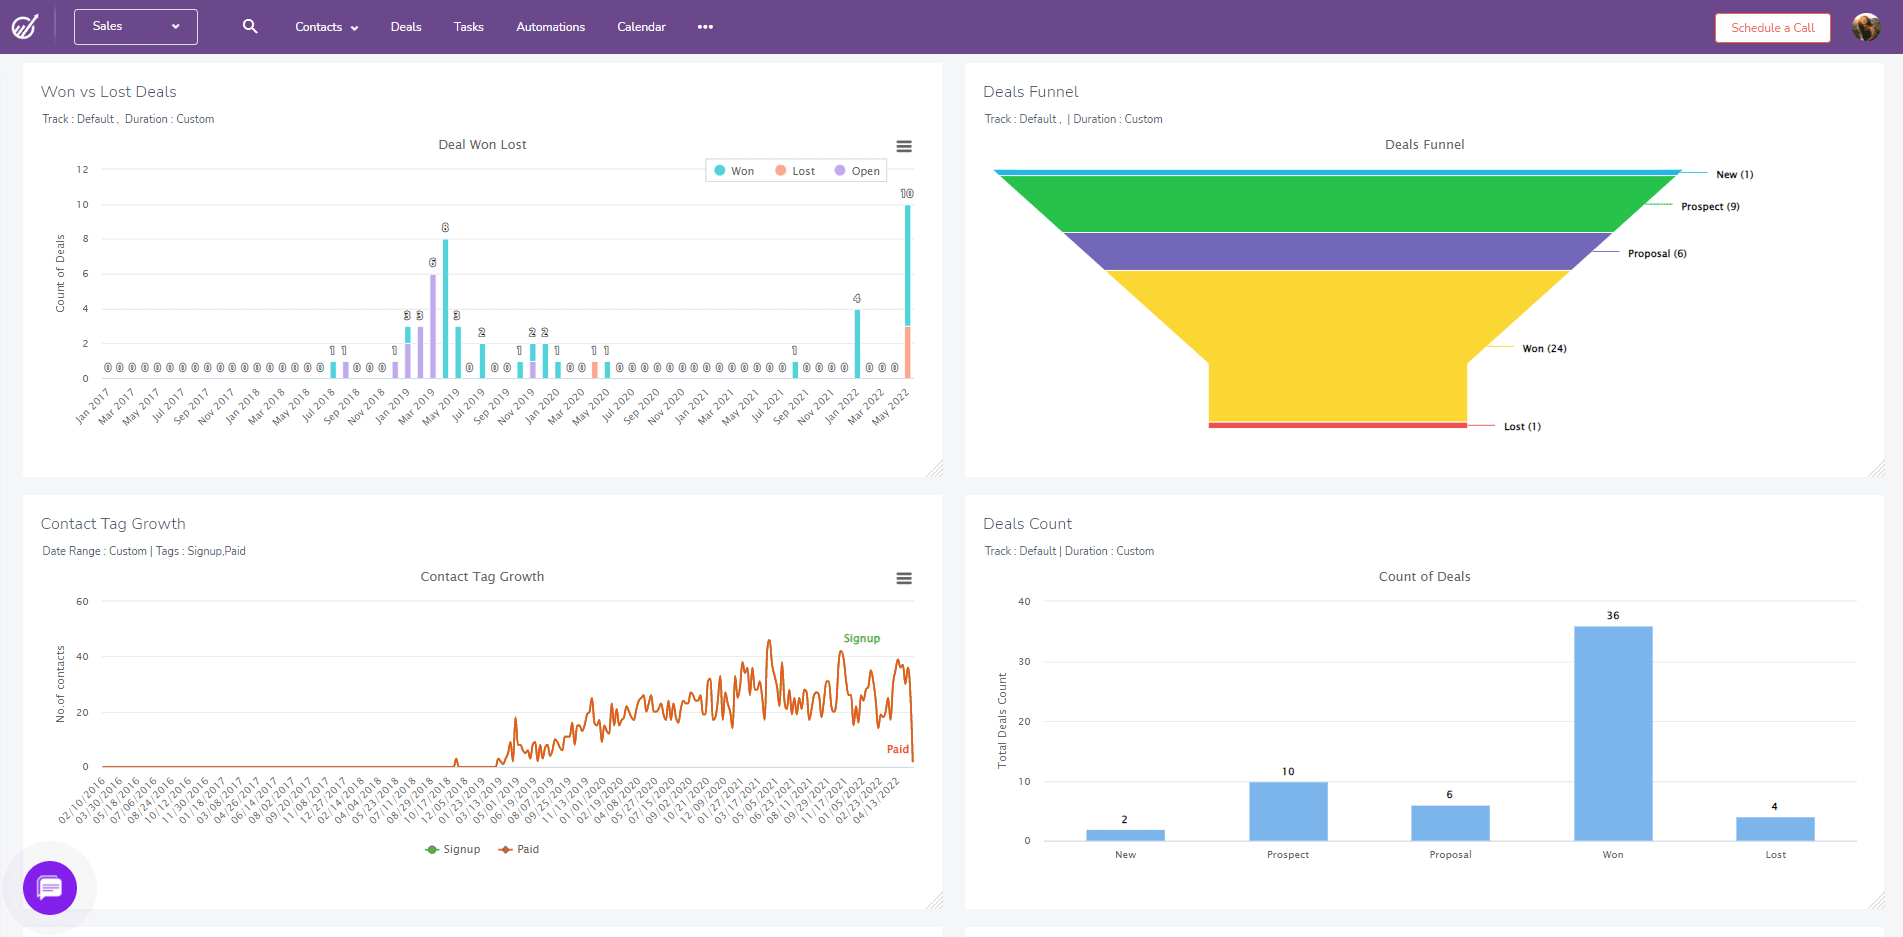 Overall sales performance dashboard example from EngageBay